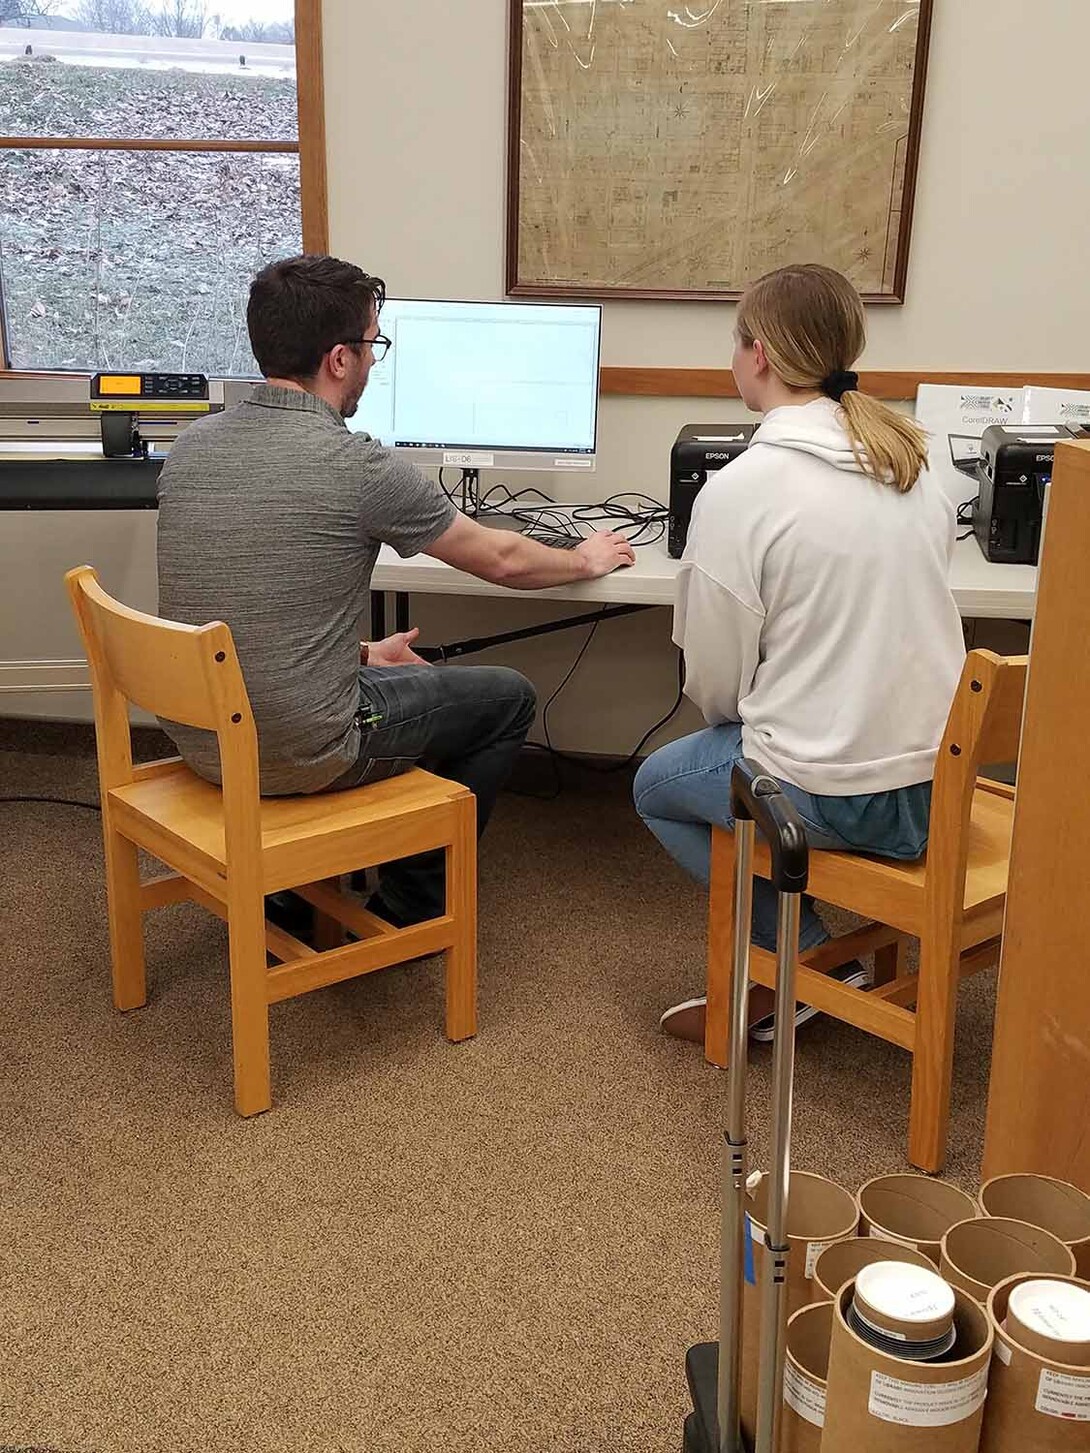 Max Wheeler, instructional designer with Nebraska Innovation Studio, shows a patron how to use a vinyl cutter at the Wayne Public Library in 2019.